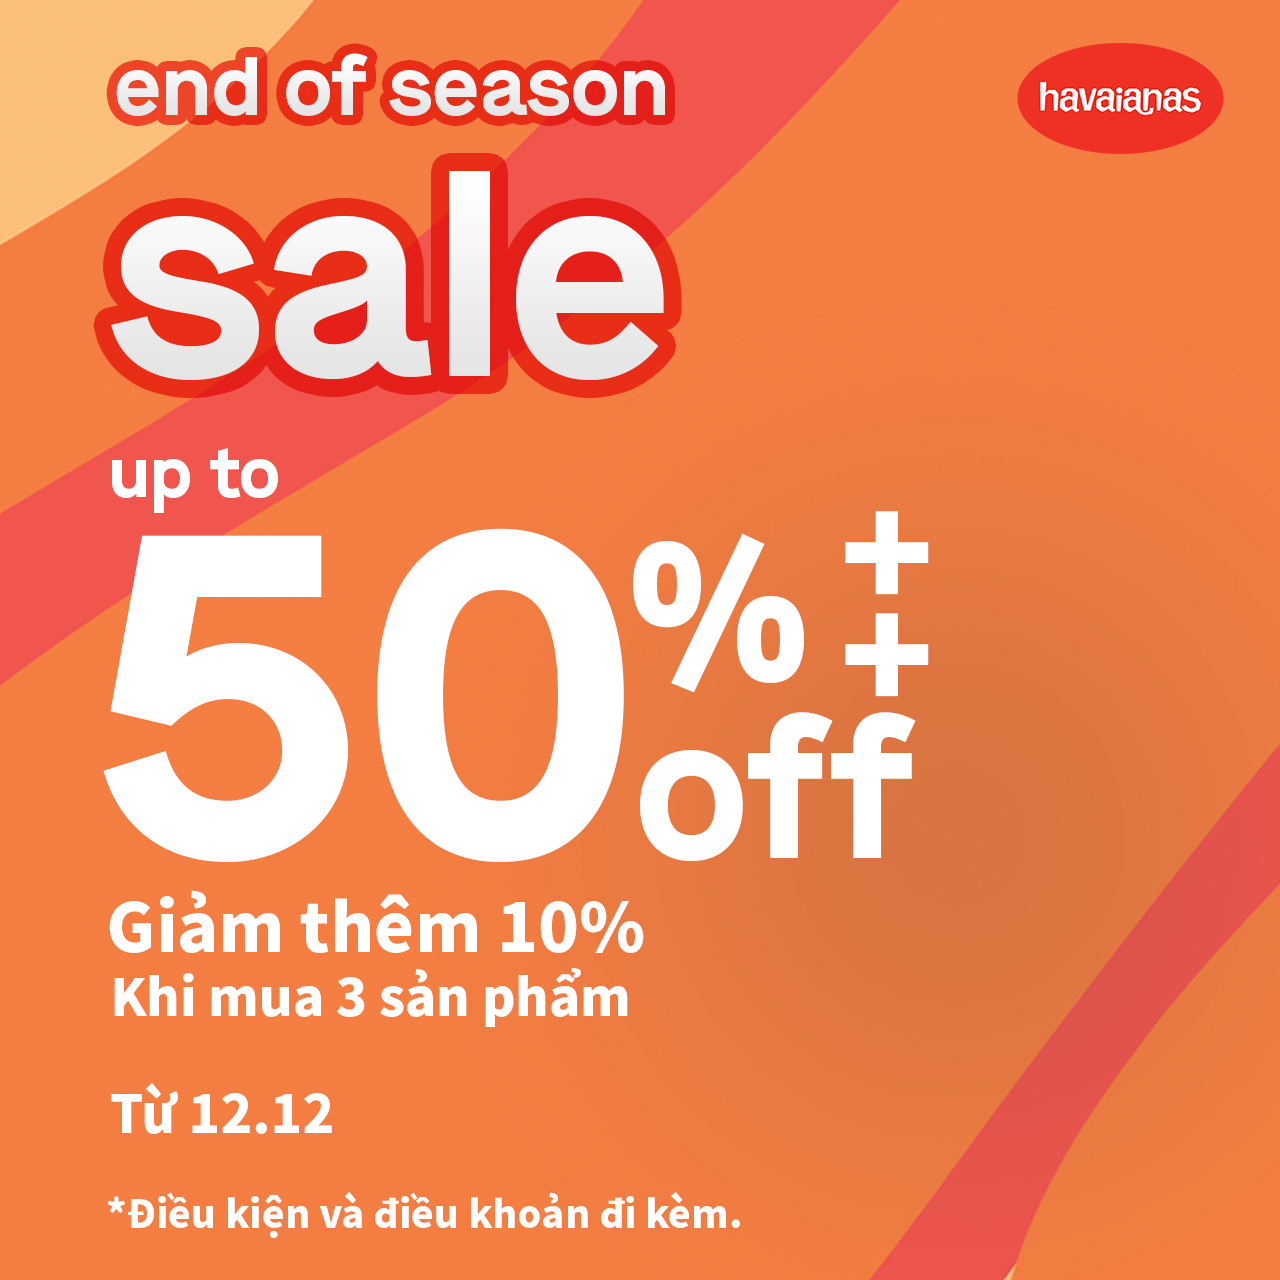 HAVAIANAS - END OF SEASON SALE UP TO 70%, ONLY FROM 2 3 9 K 🔥